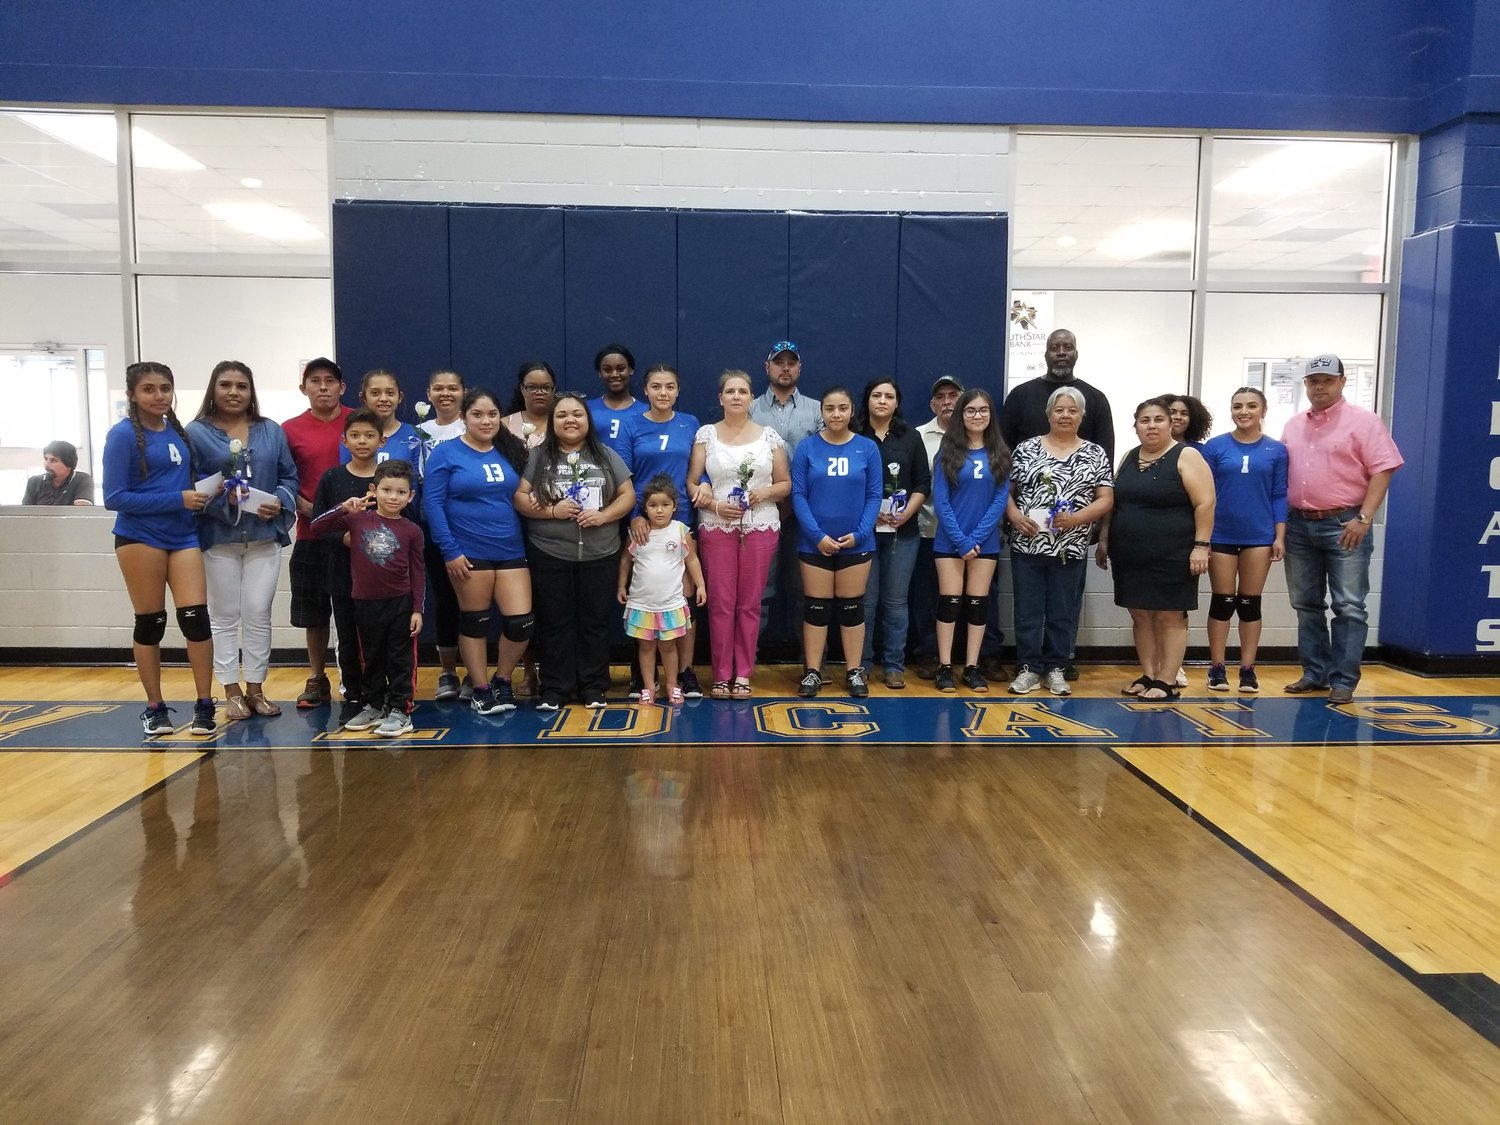 The Waelder Wildcats hosted Parents Night on Tuesday in their district loss to Prairie Lea.